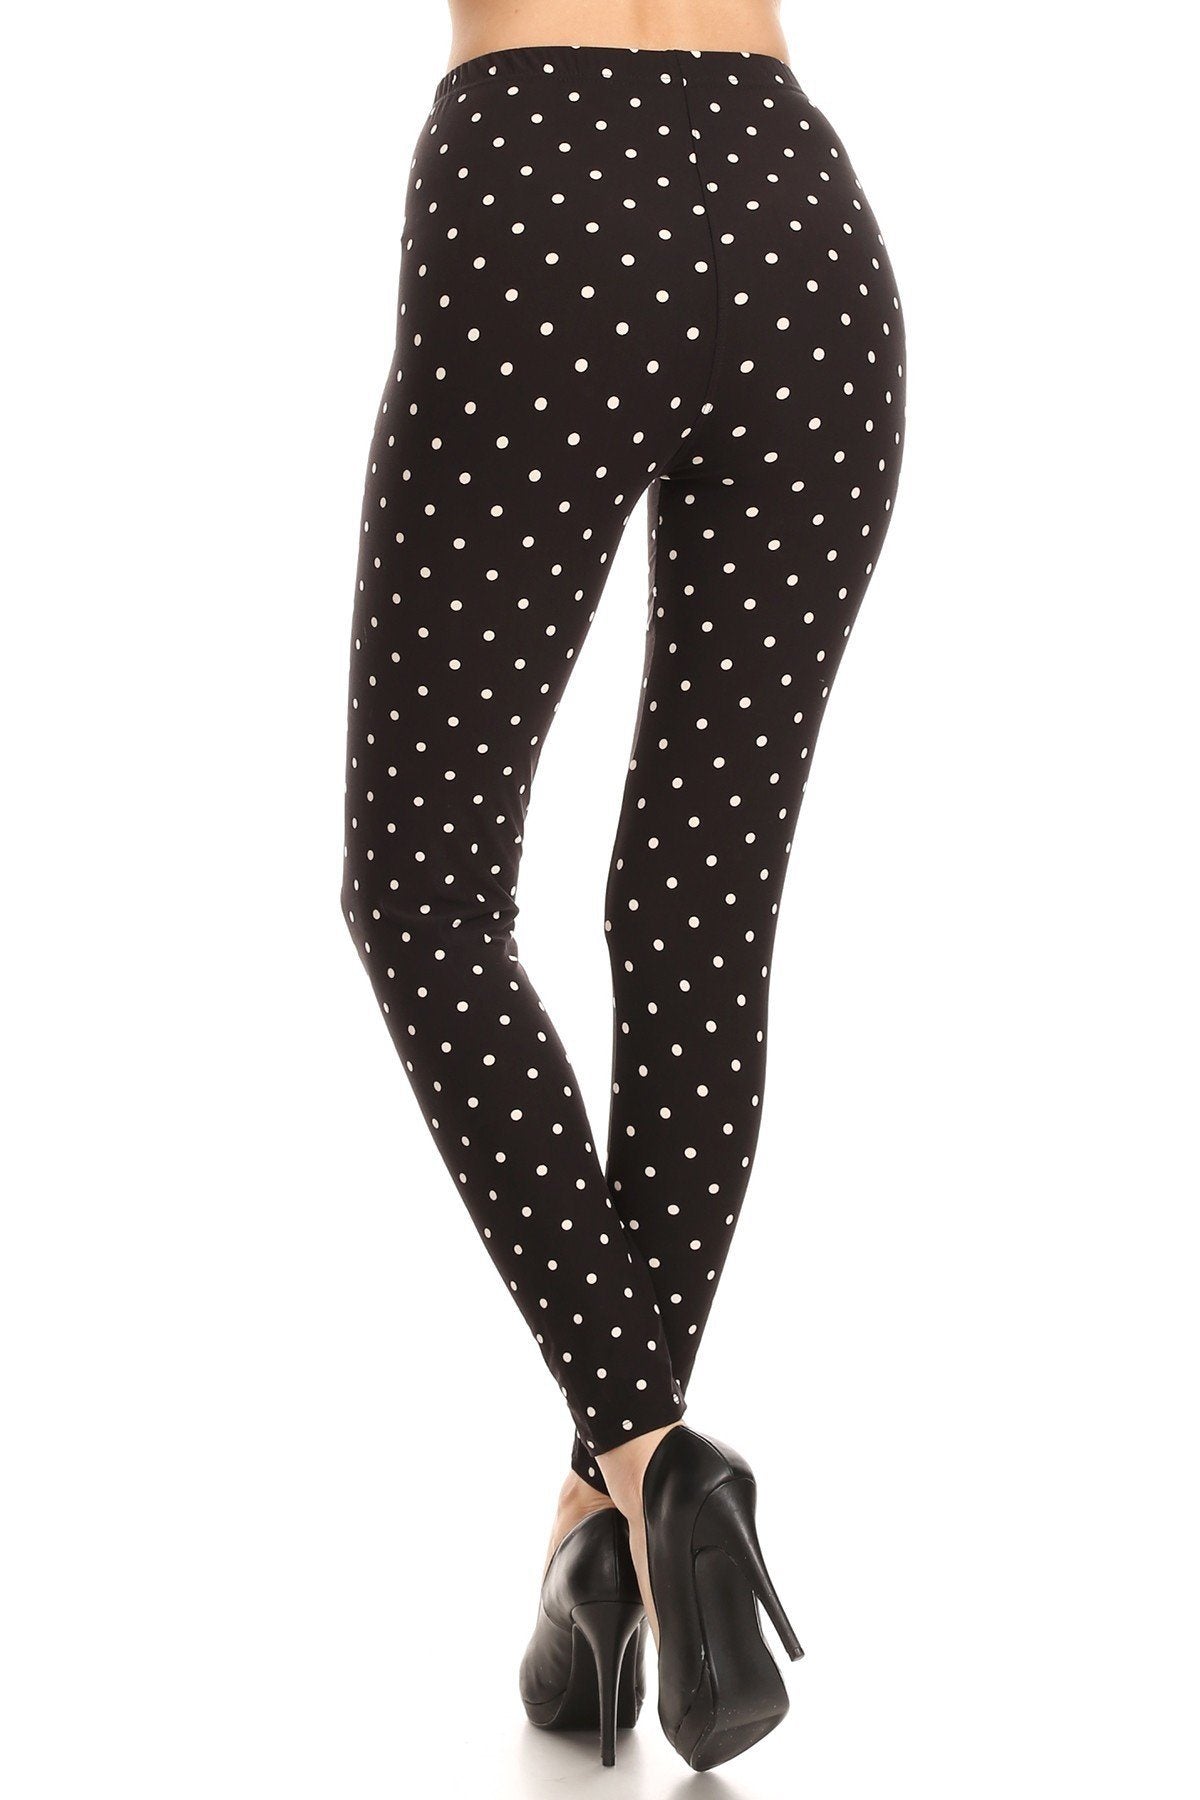 High Waisted Leggings With An Elastic Band In A White Polka Dot Print Over A Black Background - Fashion Quality Boutik